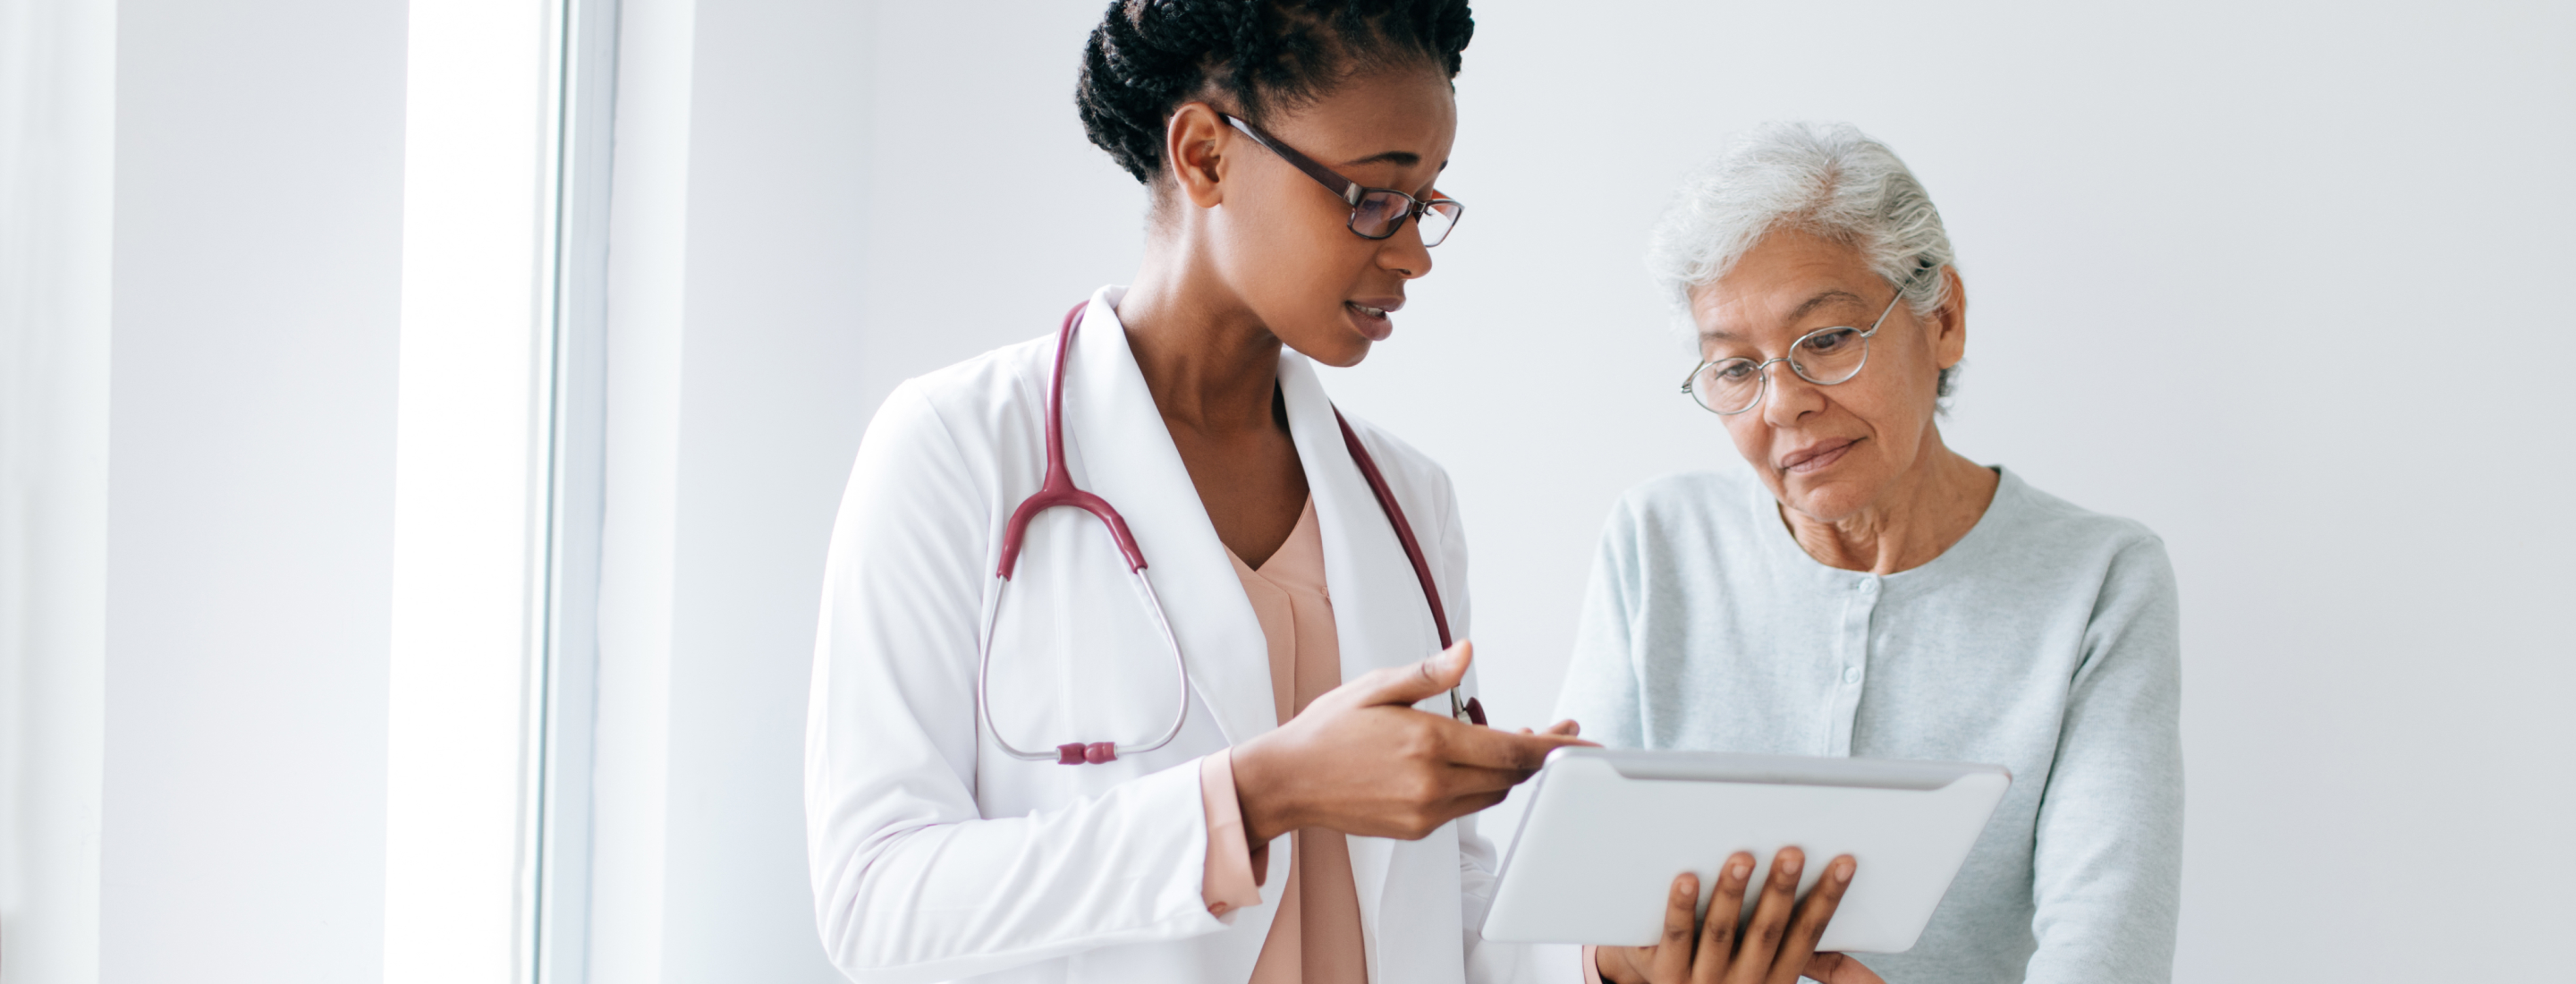 A Primary Care Provider shares the results of a Digital Cognitive Assessment with their patient. Modern Cognitive testing provides greater insight into a patient cognitive function and can detect early signs of Alzheimer's and other dementias